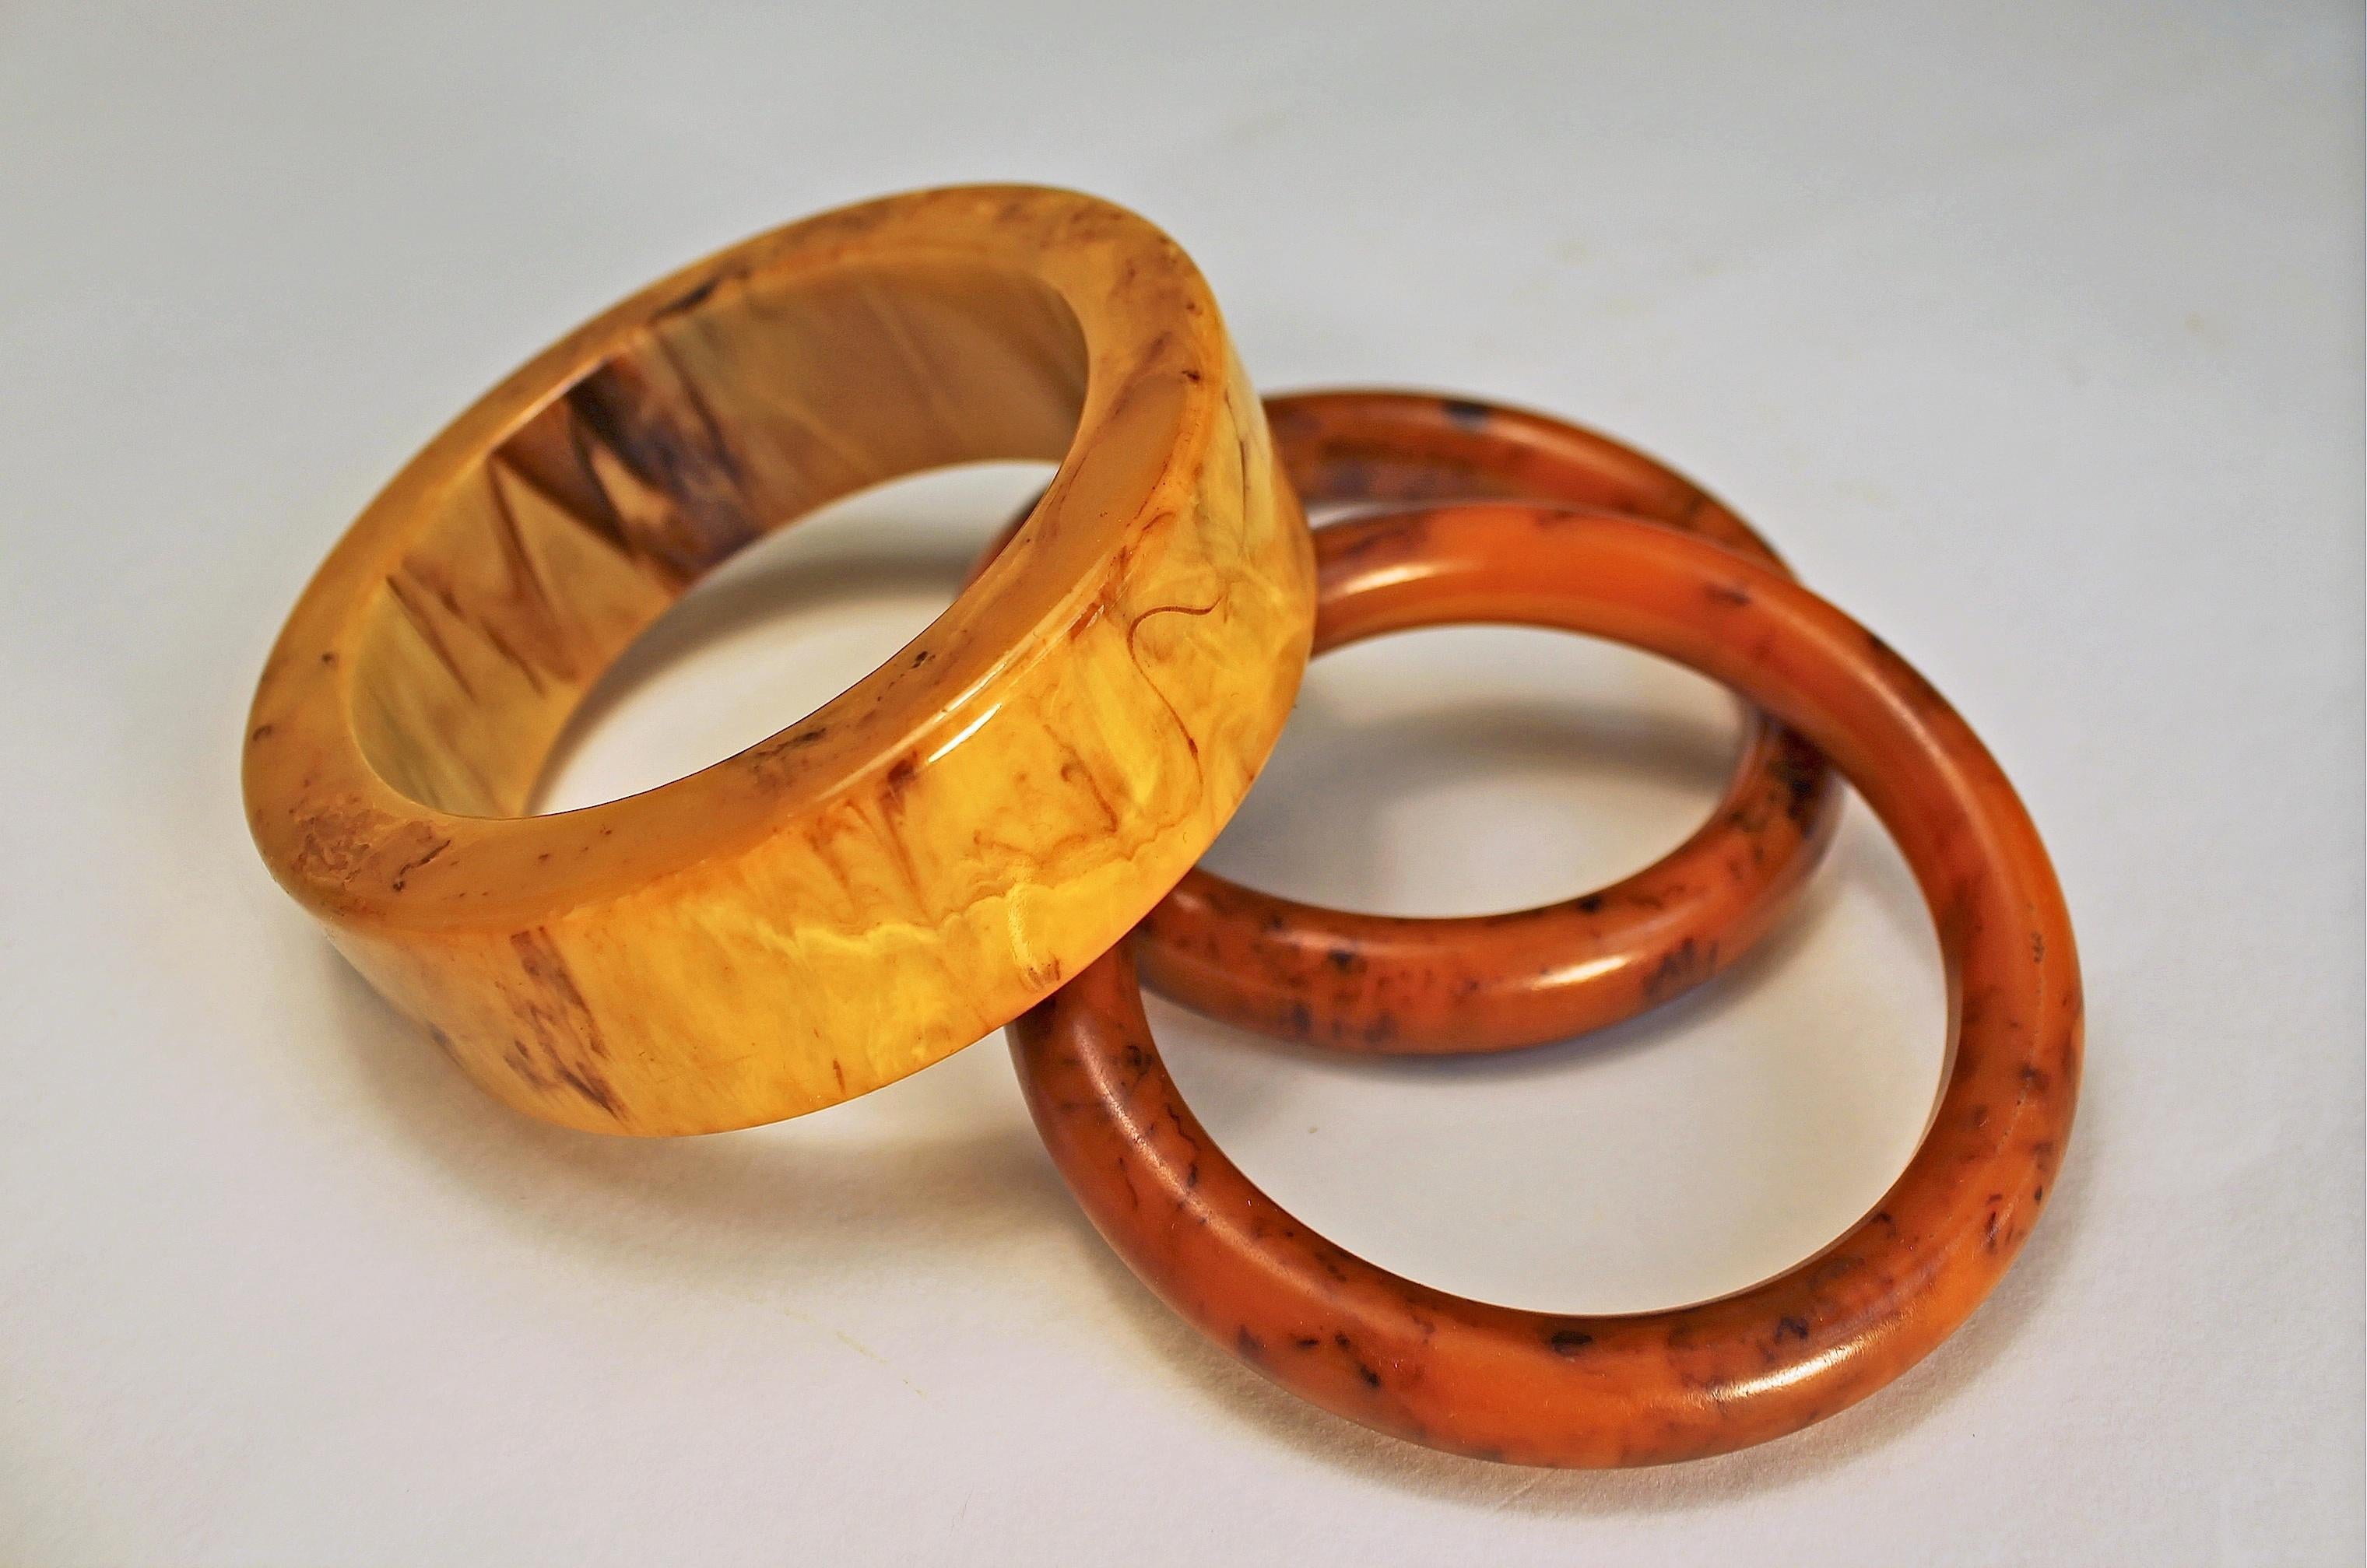 Fabulous trio of bakelite bangle cuffs in butterscotch and a warm caramel cinnabar color.  They look fabulous together or they can be worn separately.  You can't go wrong with this statement!!! Large cuff is 3.4